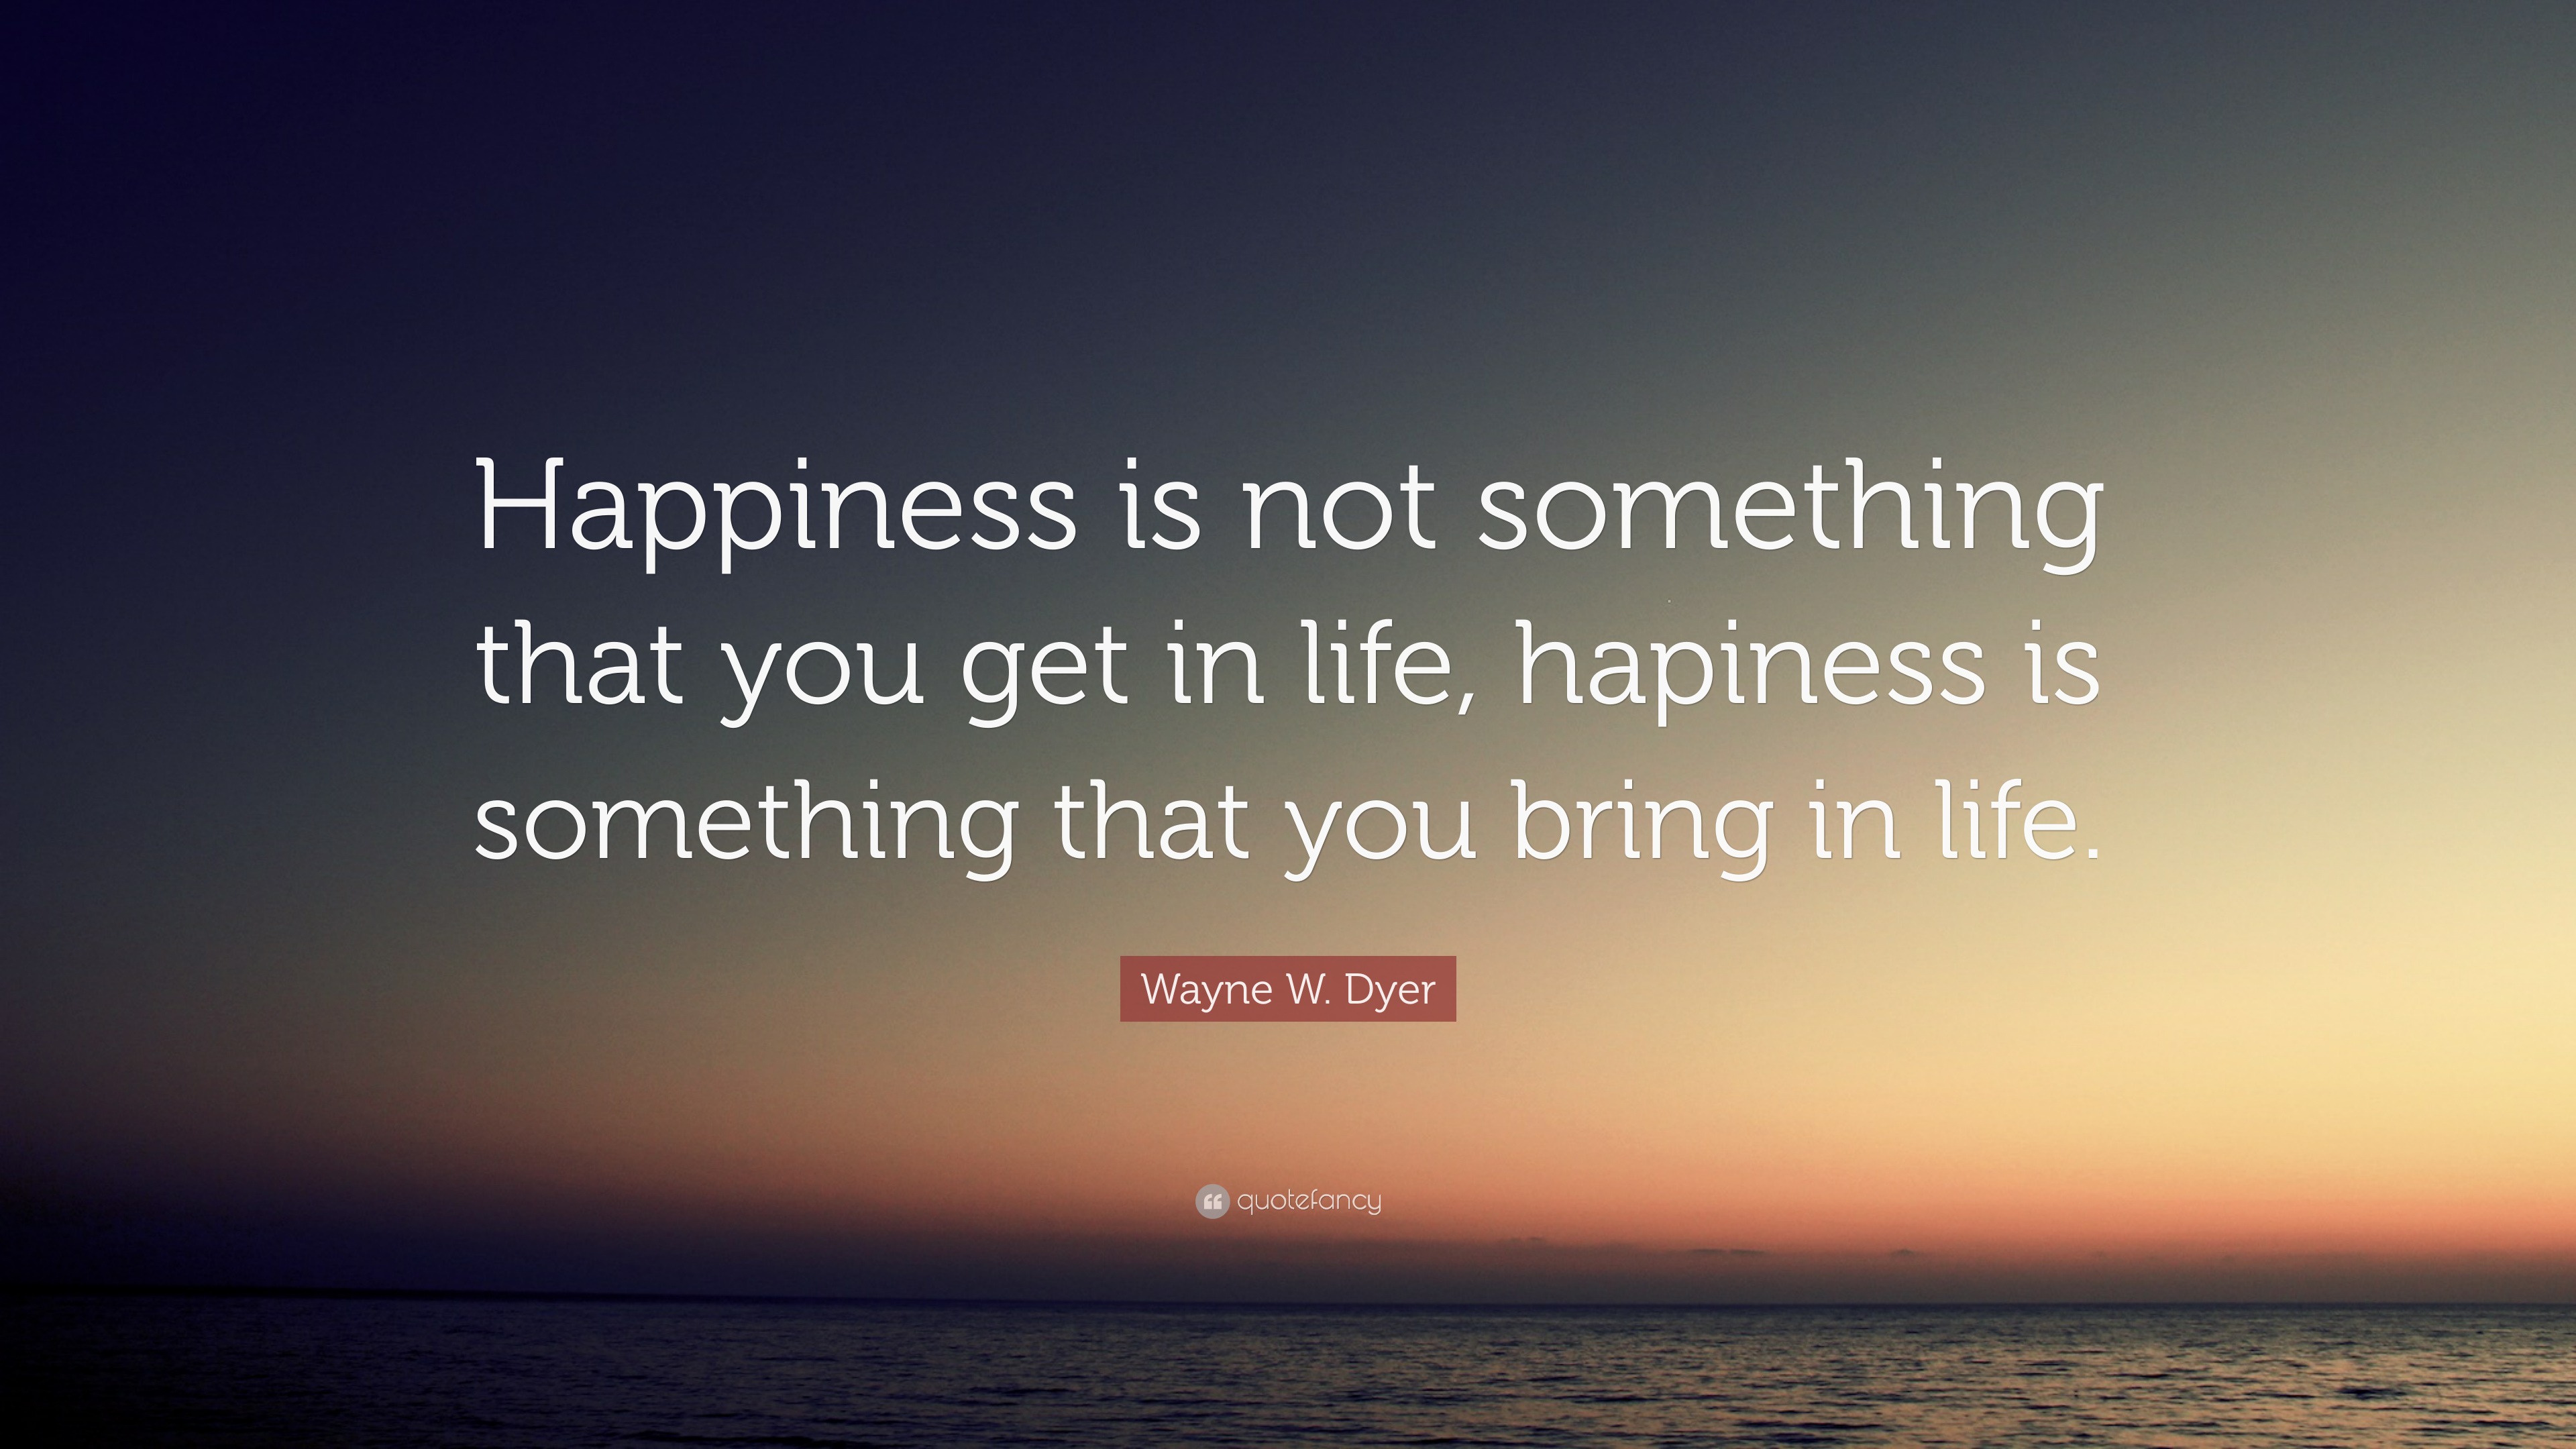 Wayne W. Dyer Quote: “Happiness is not something that you get in life ...